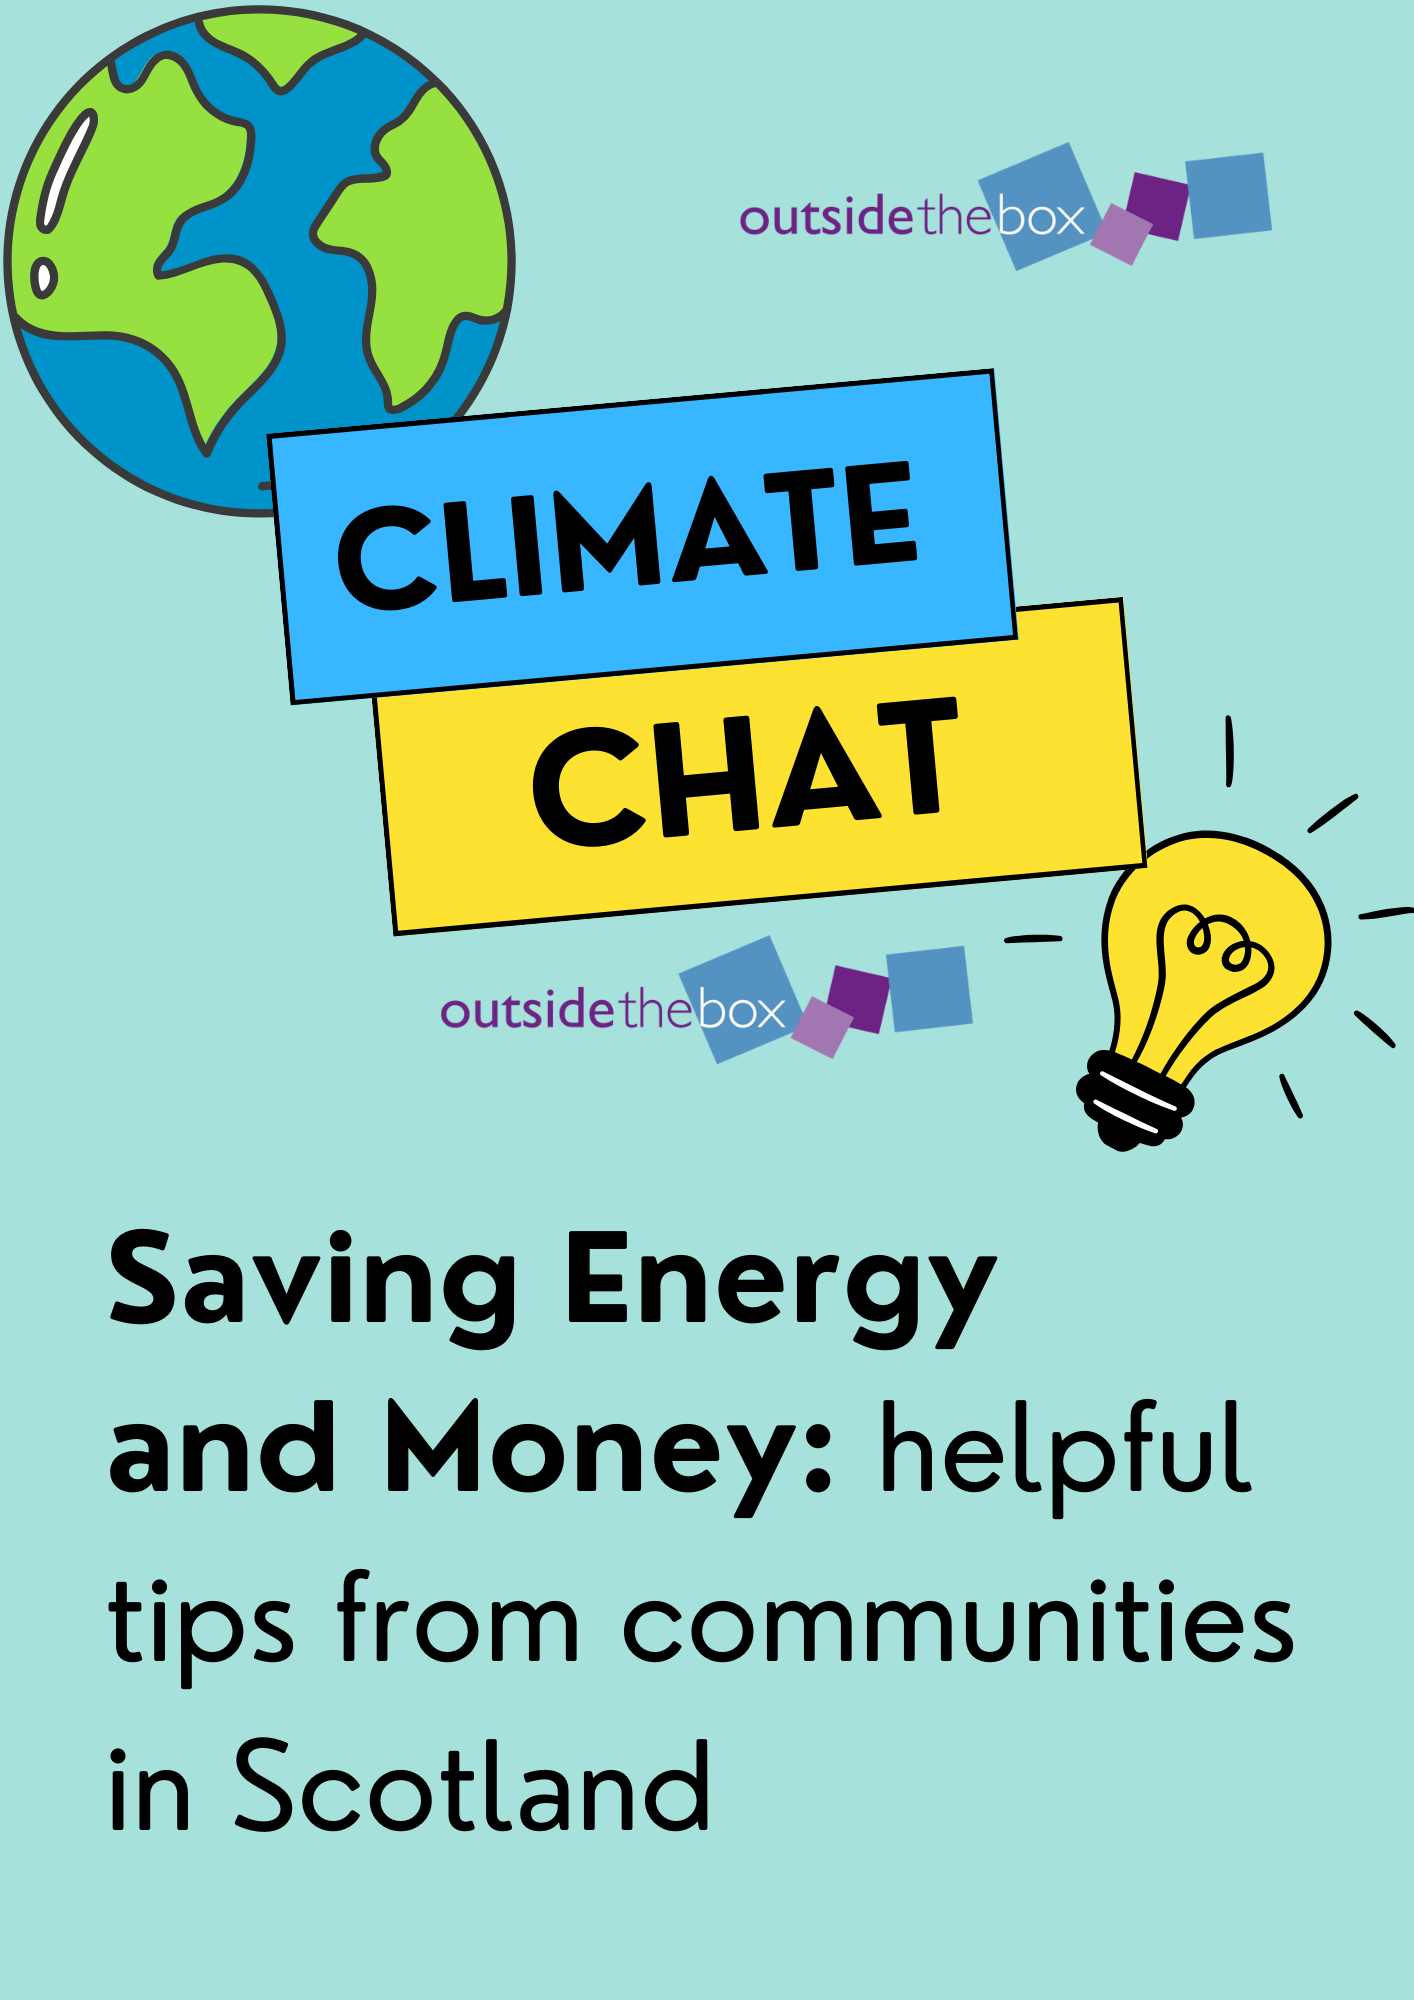 Saving Energy and Money: helpful tips from communities in Scotland